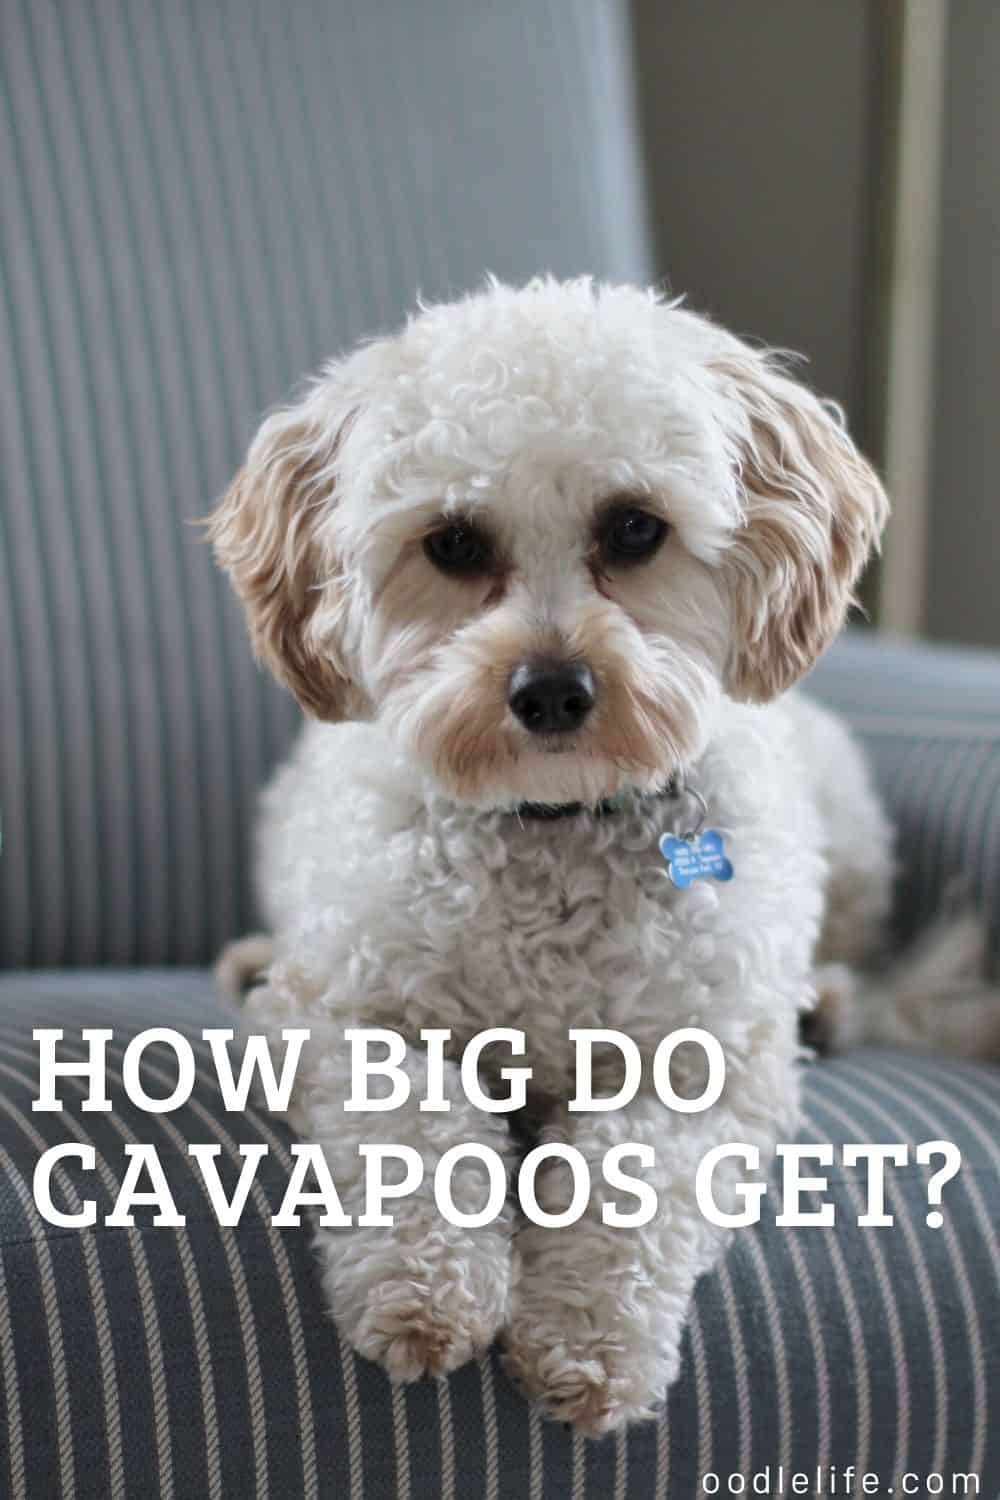 How Big Do Cavapoos Get? [Cavapoo Size Guide] - Oodle Life